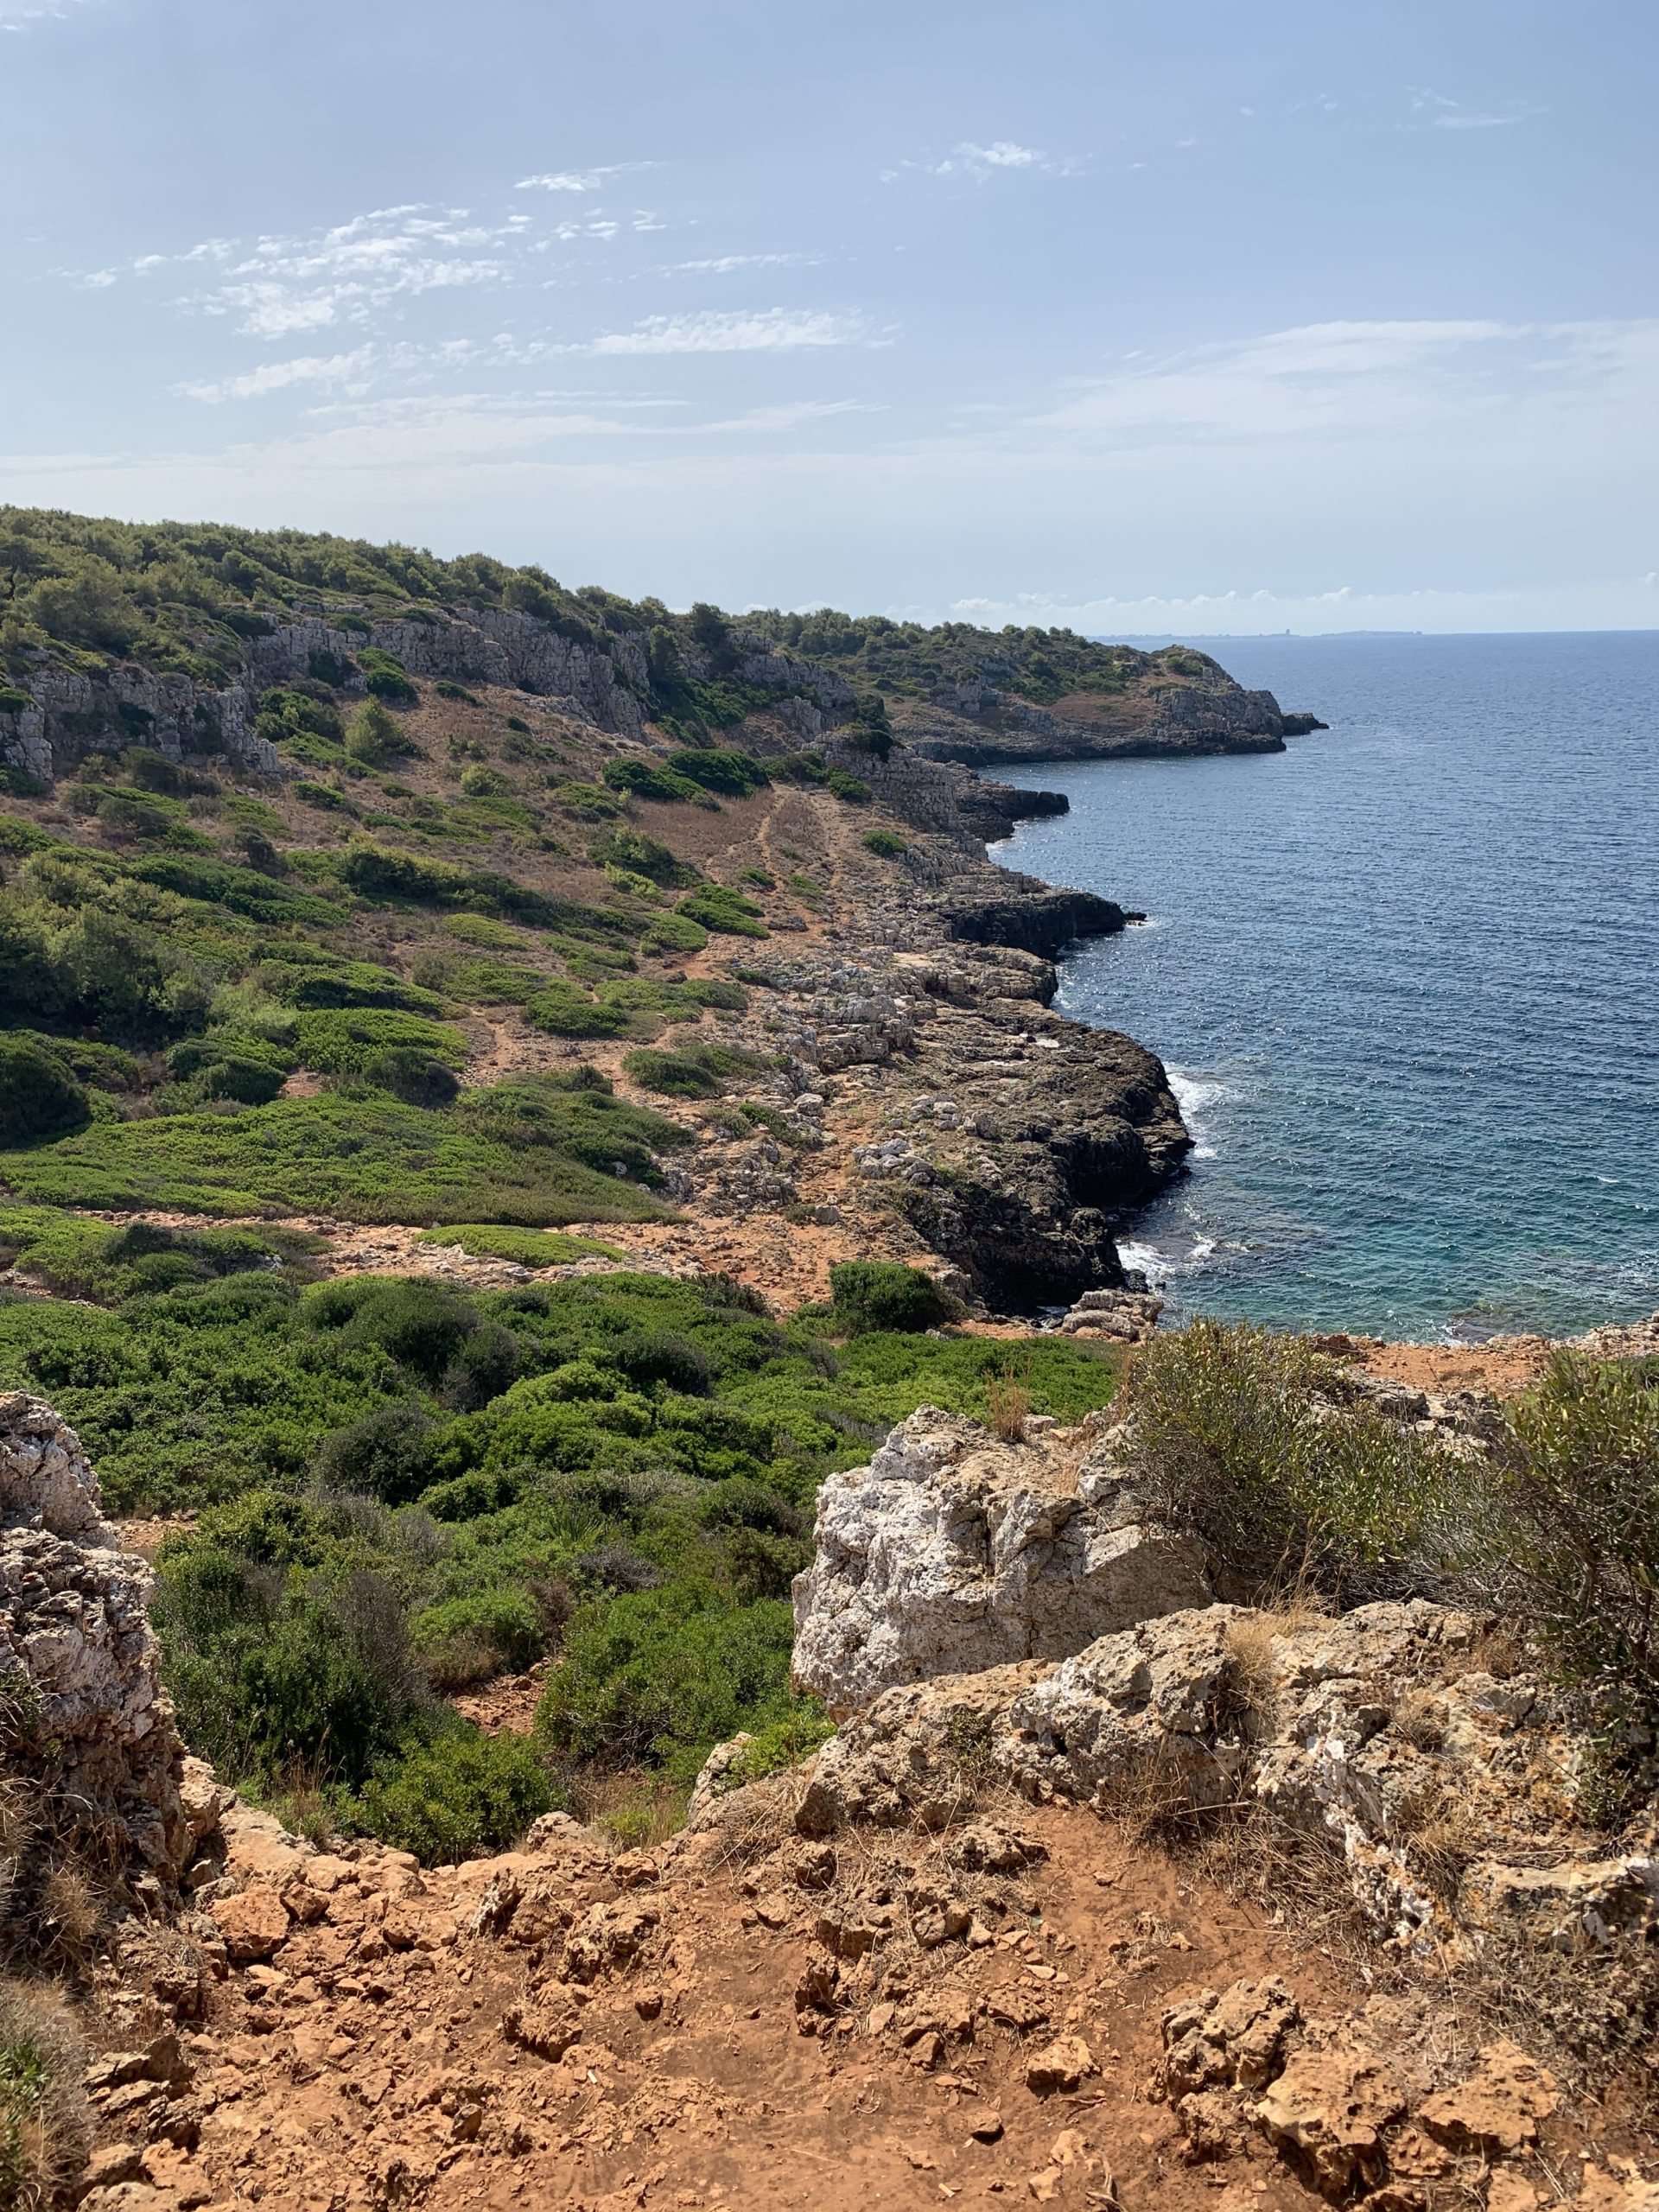 Porto Selvaggio, situated in a nature reserve, is a popular local beach with rocks | Photo © the Puglia Guys for the Big Gay Podcast from Puglia guides to gay Puglia, Italy’s top gay summer destination